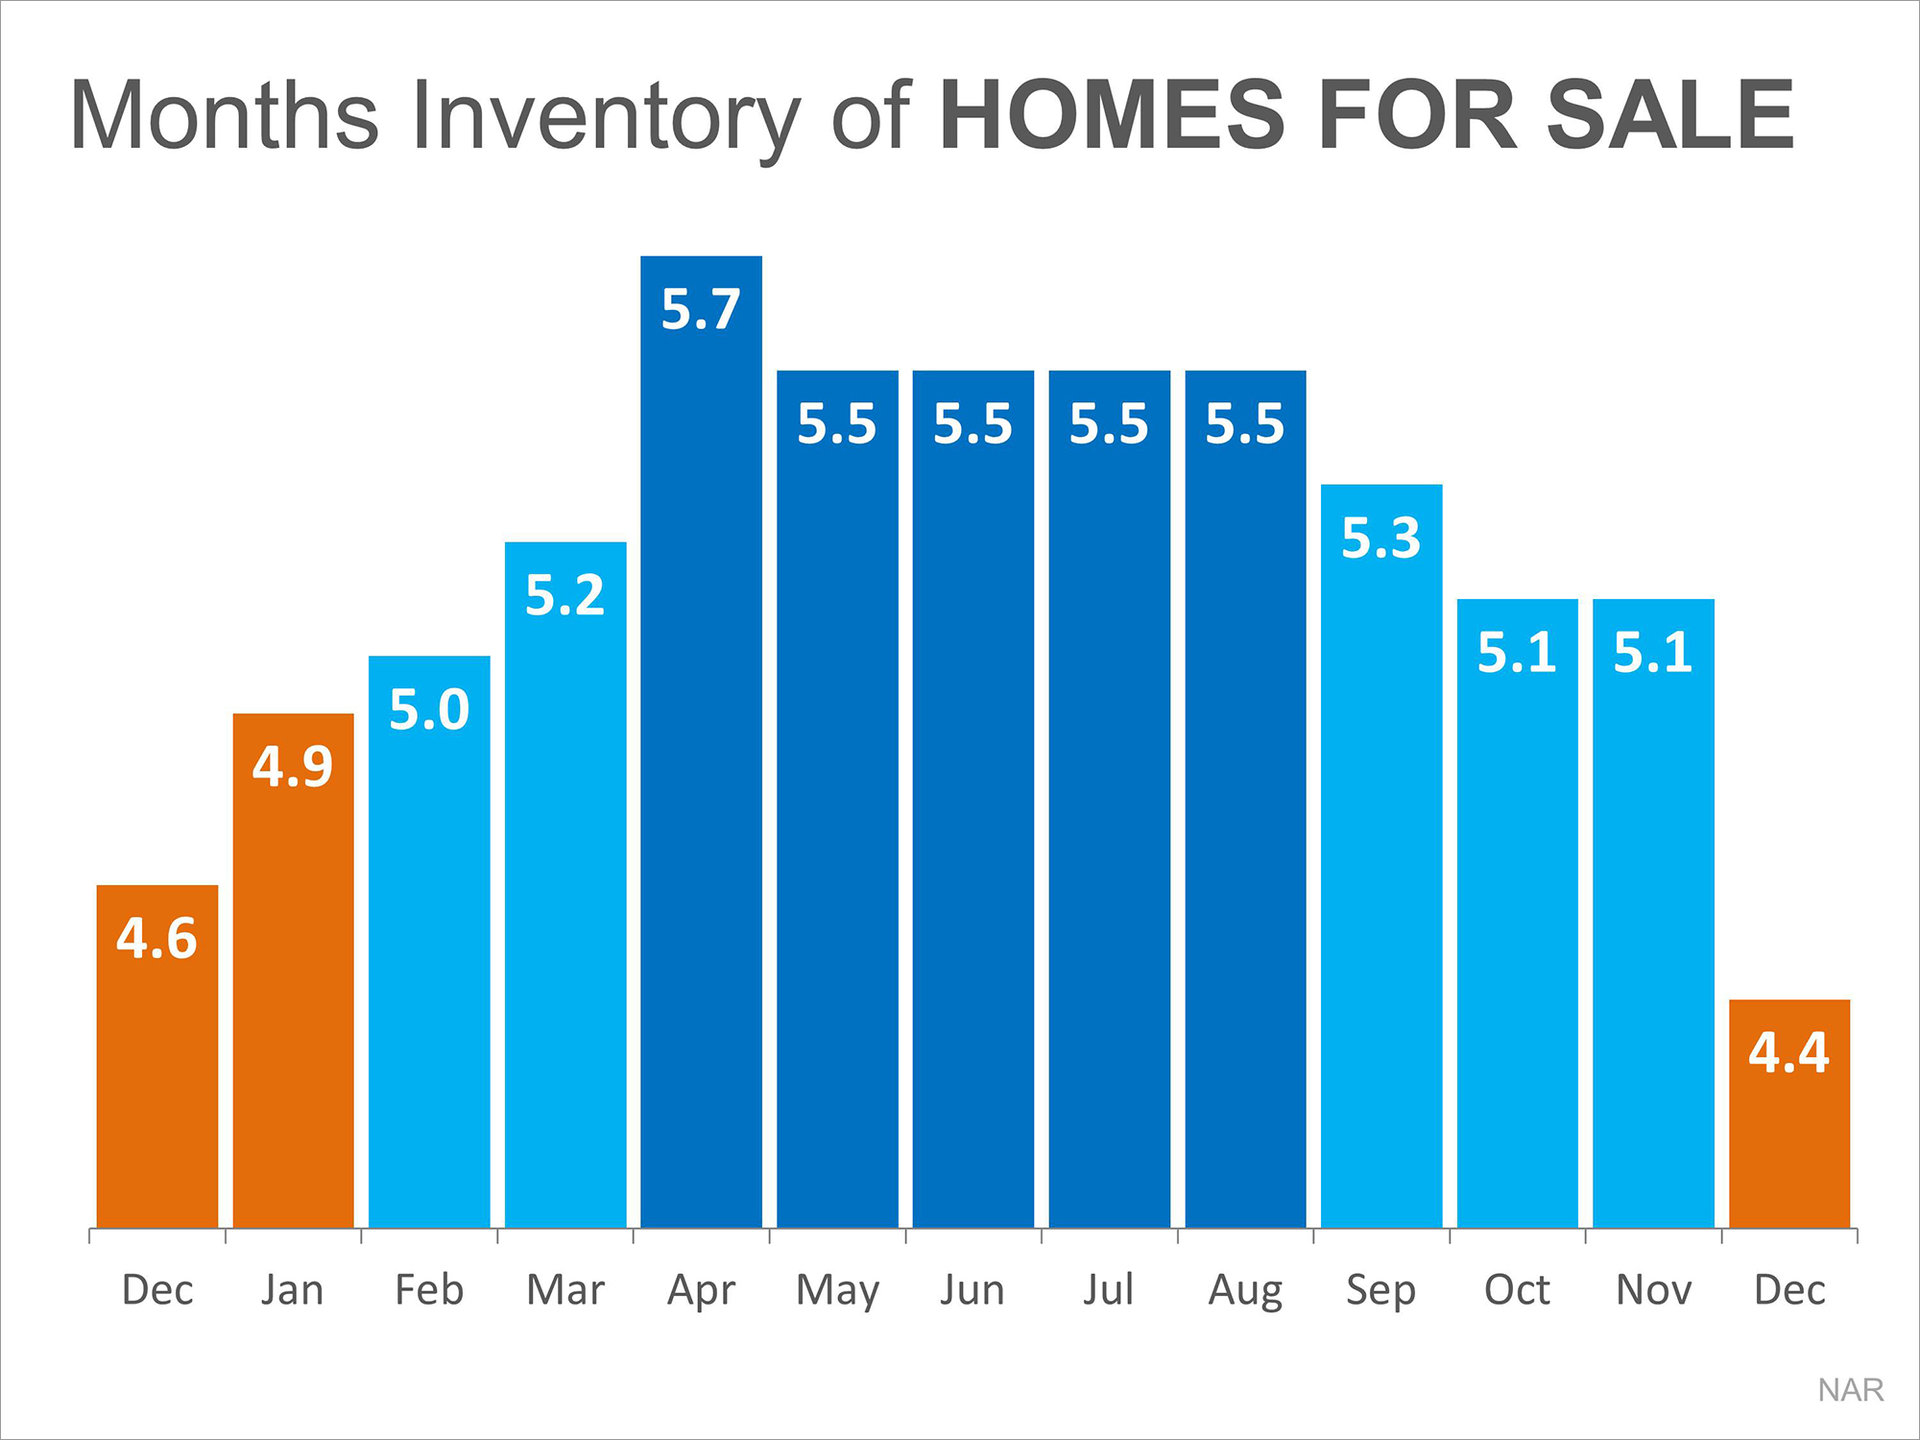 Months Inventory of Homes for Sale | Keeping Current Matters